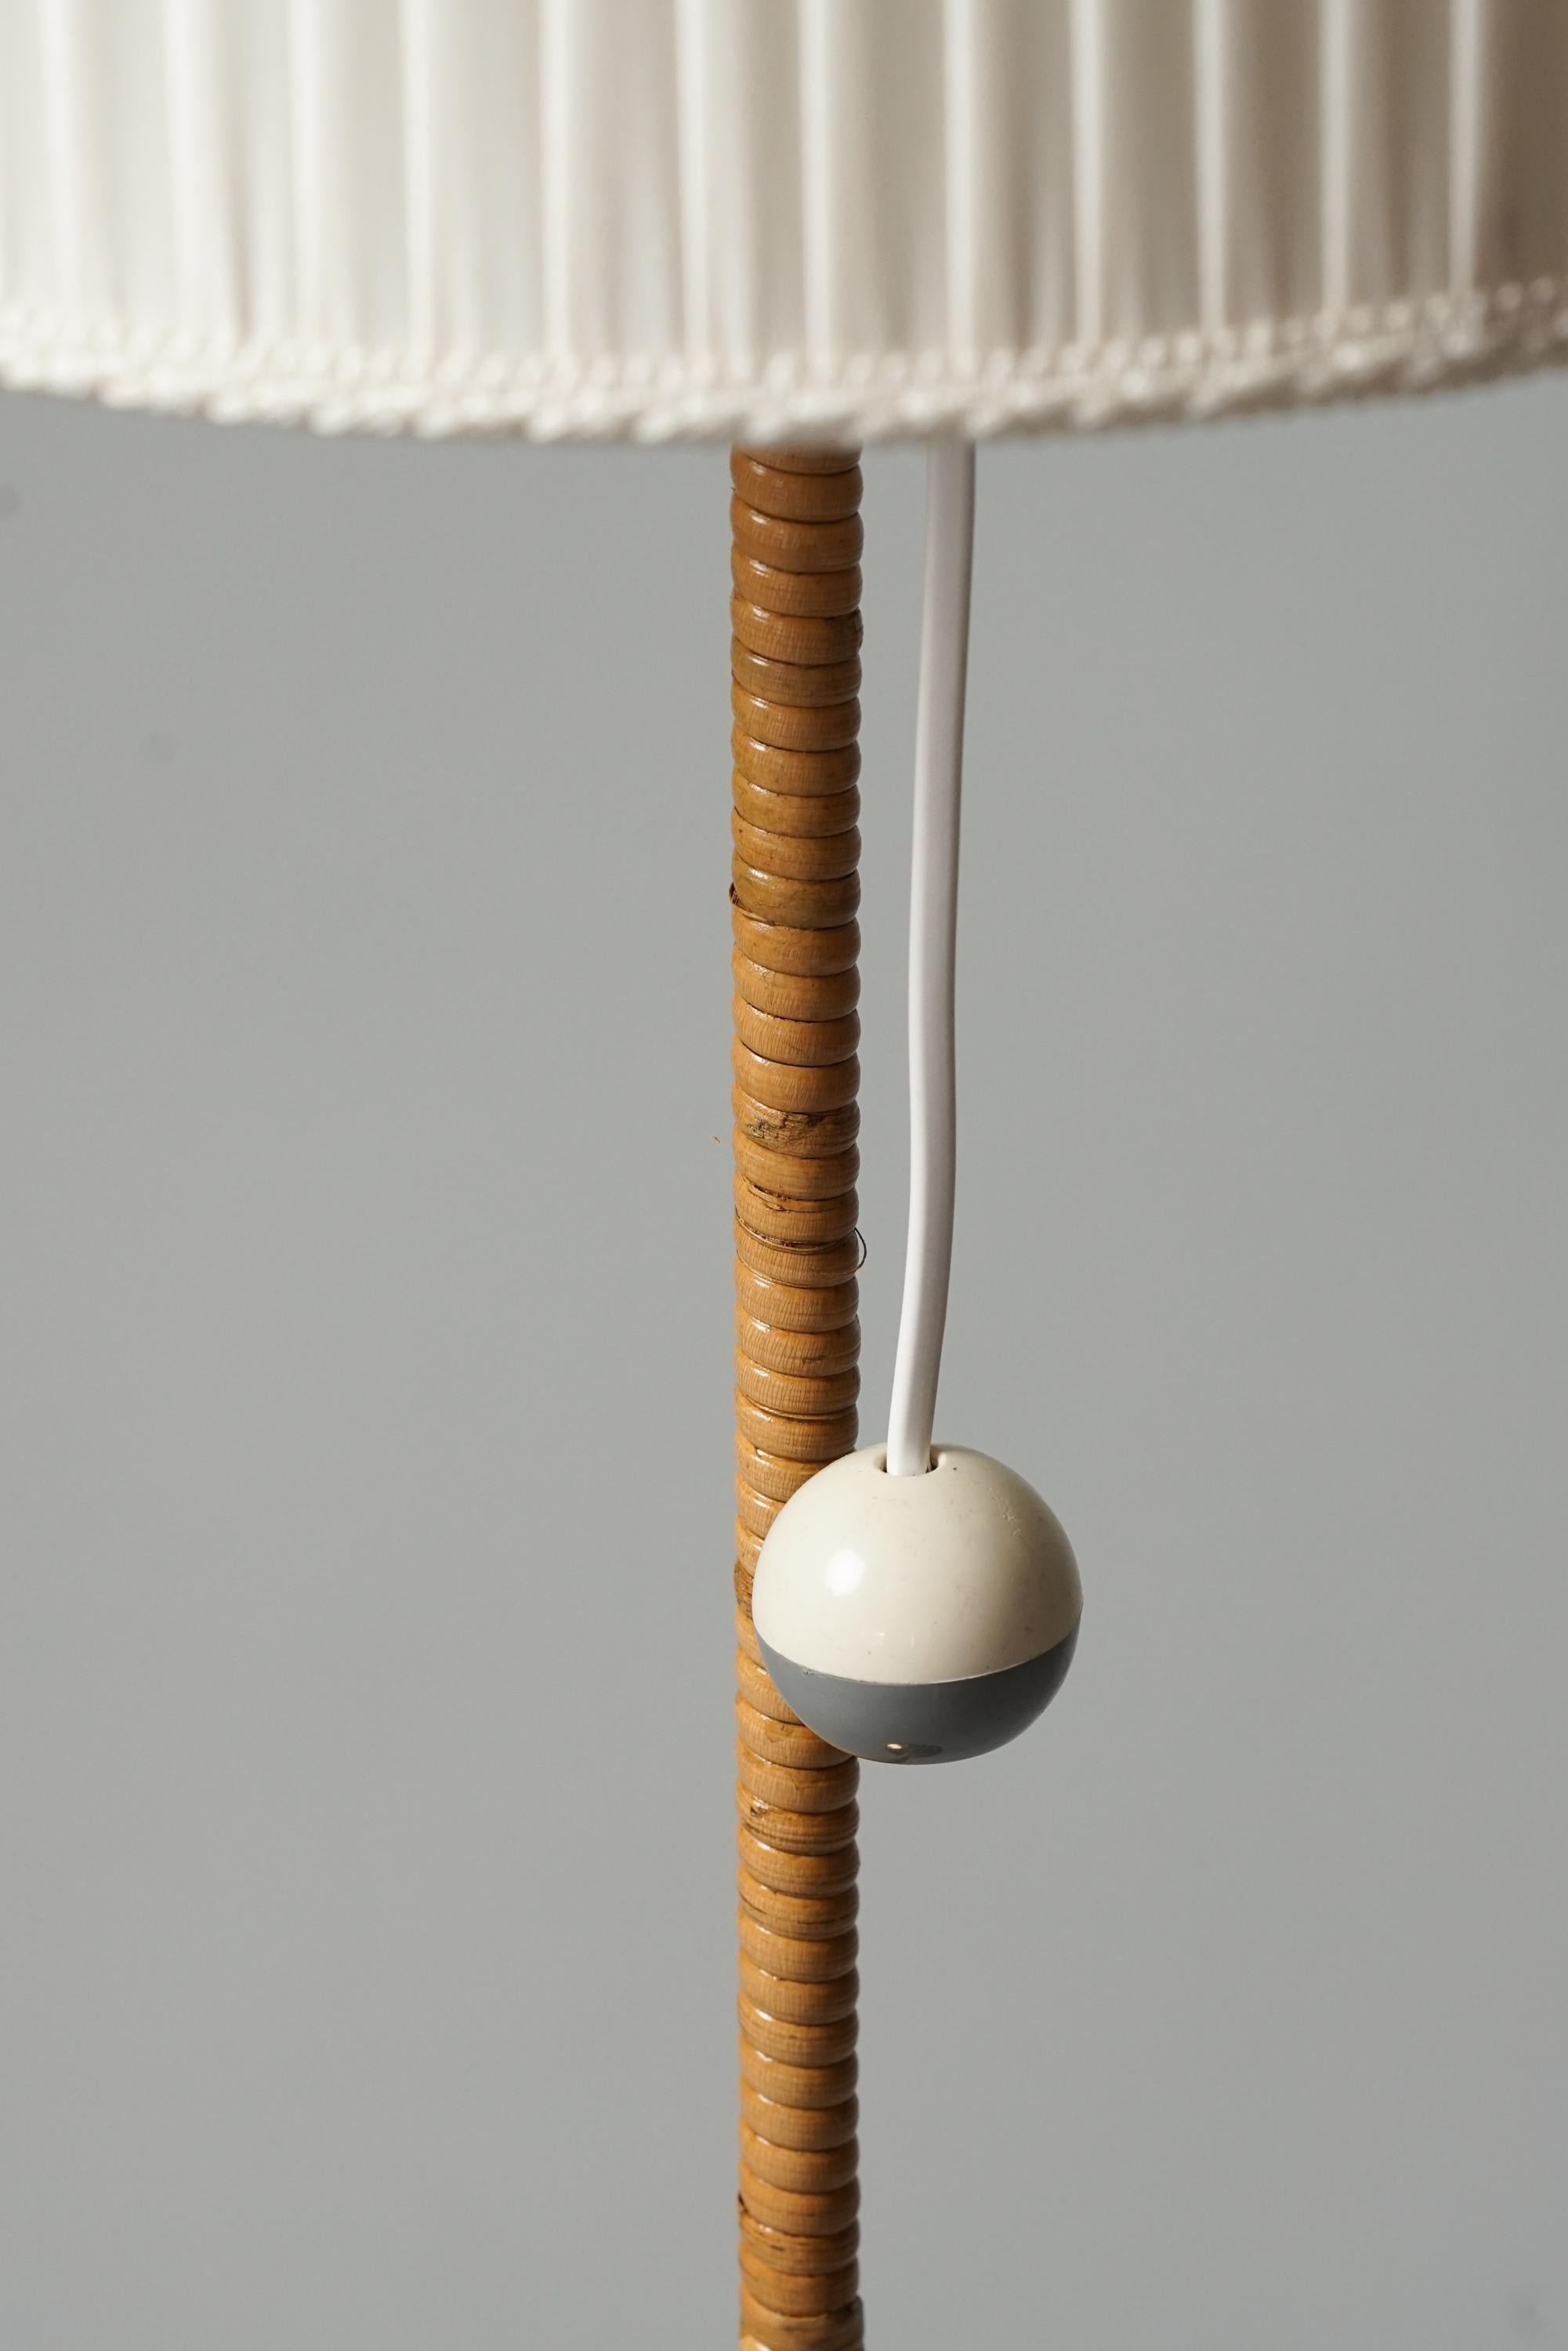 Scandinavian Modern Floor Lamp in Paavo Tynell Style, 1950s/1960s For Sale 2